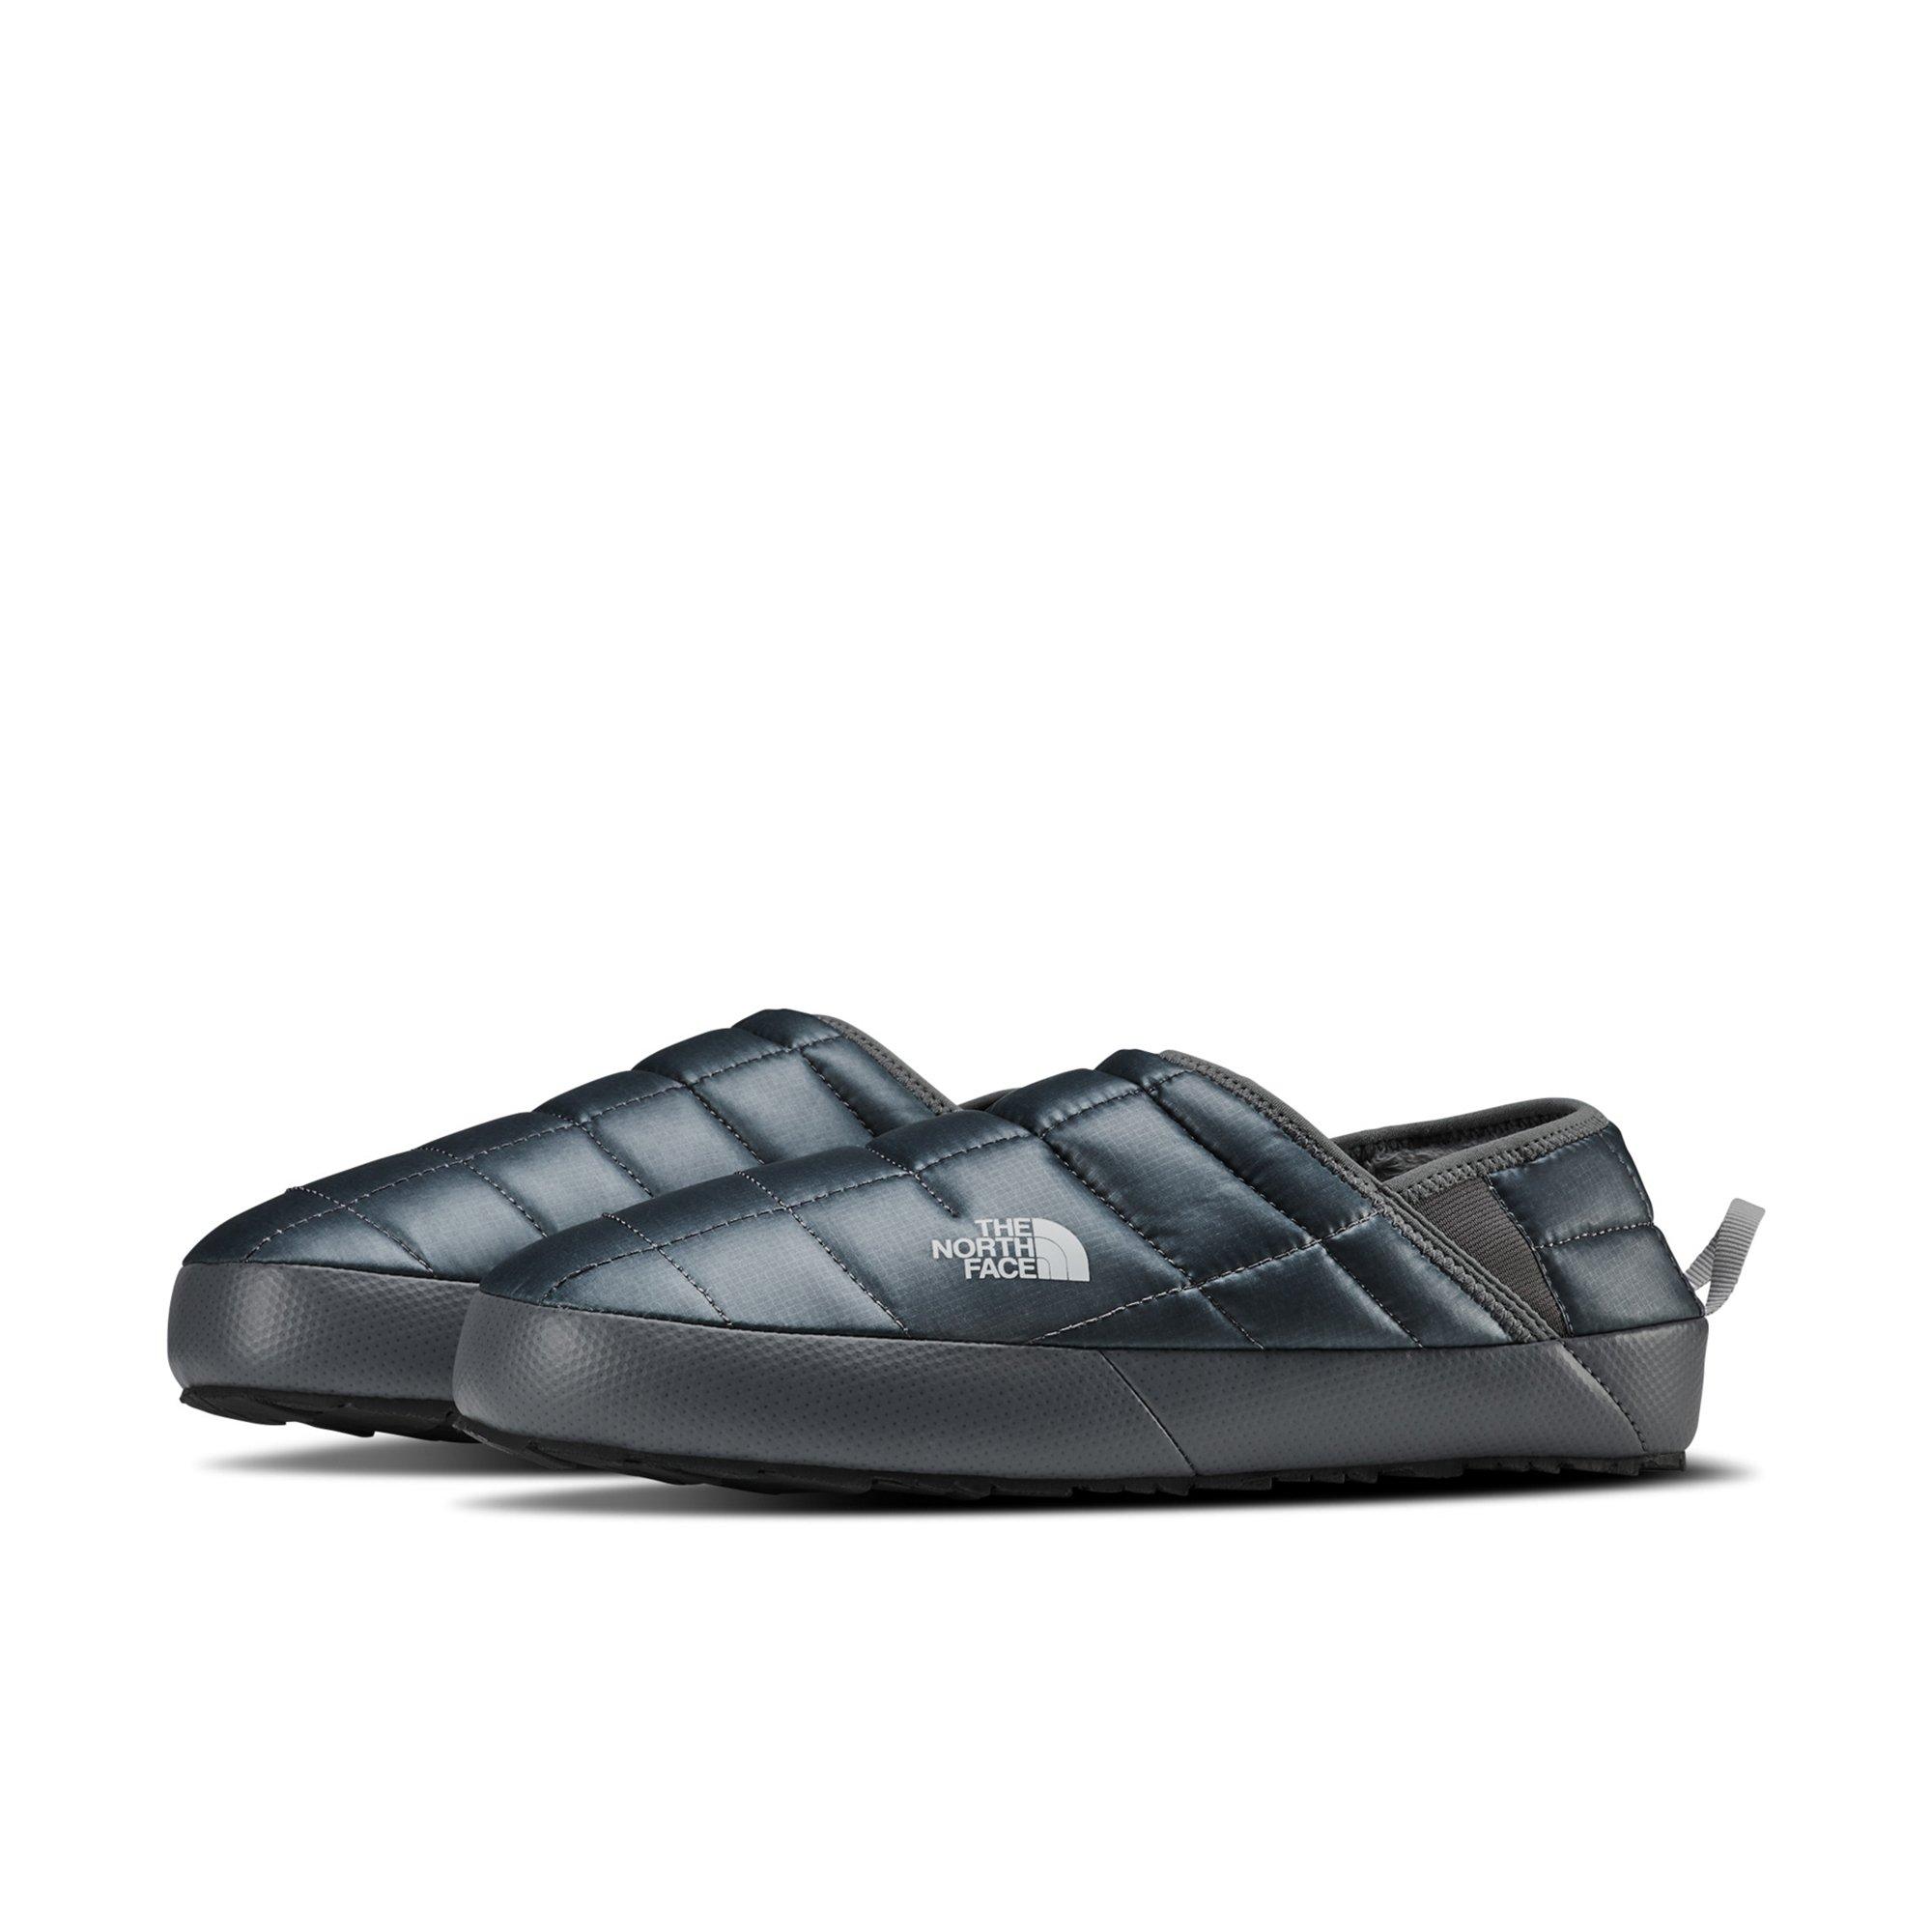 north face mule slippers mens